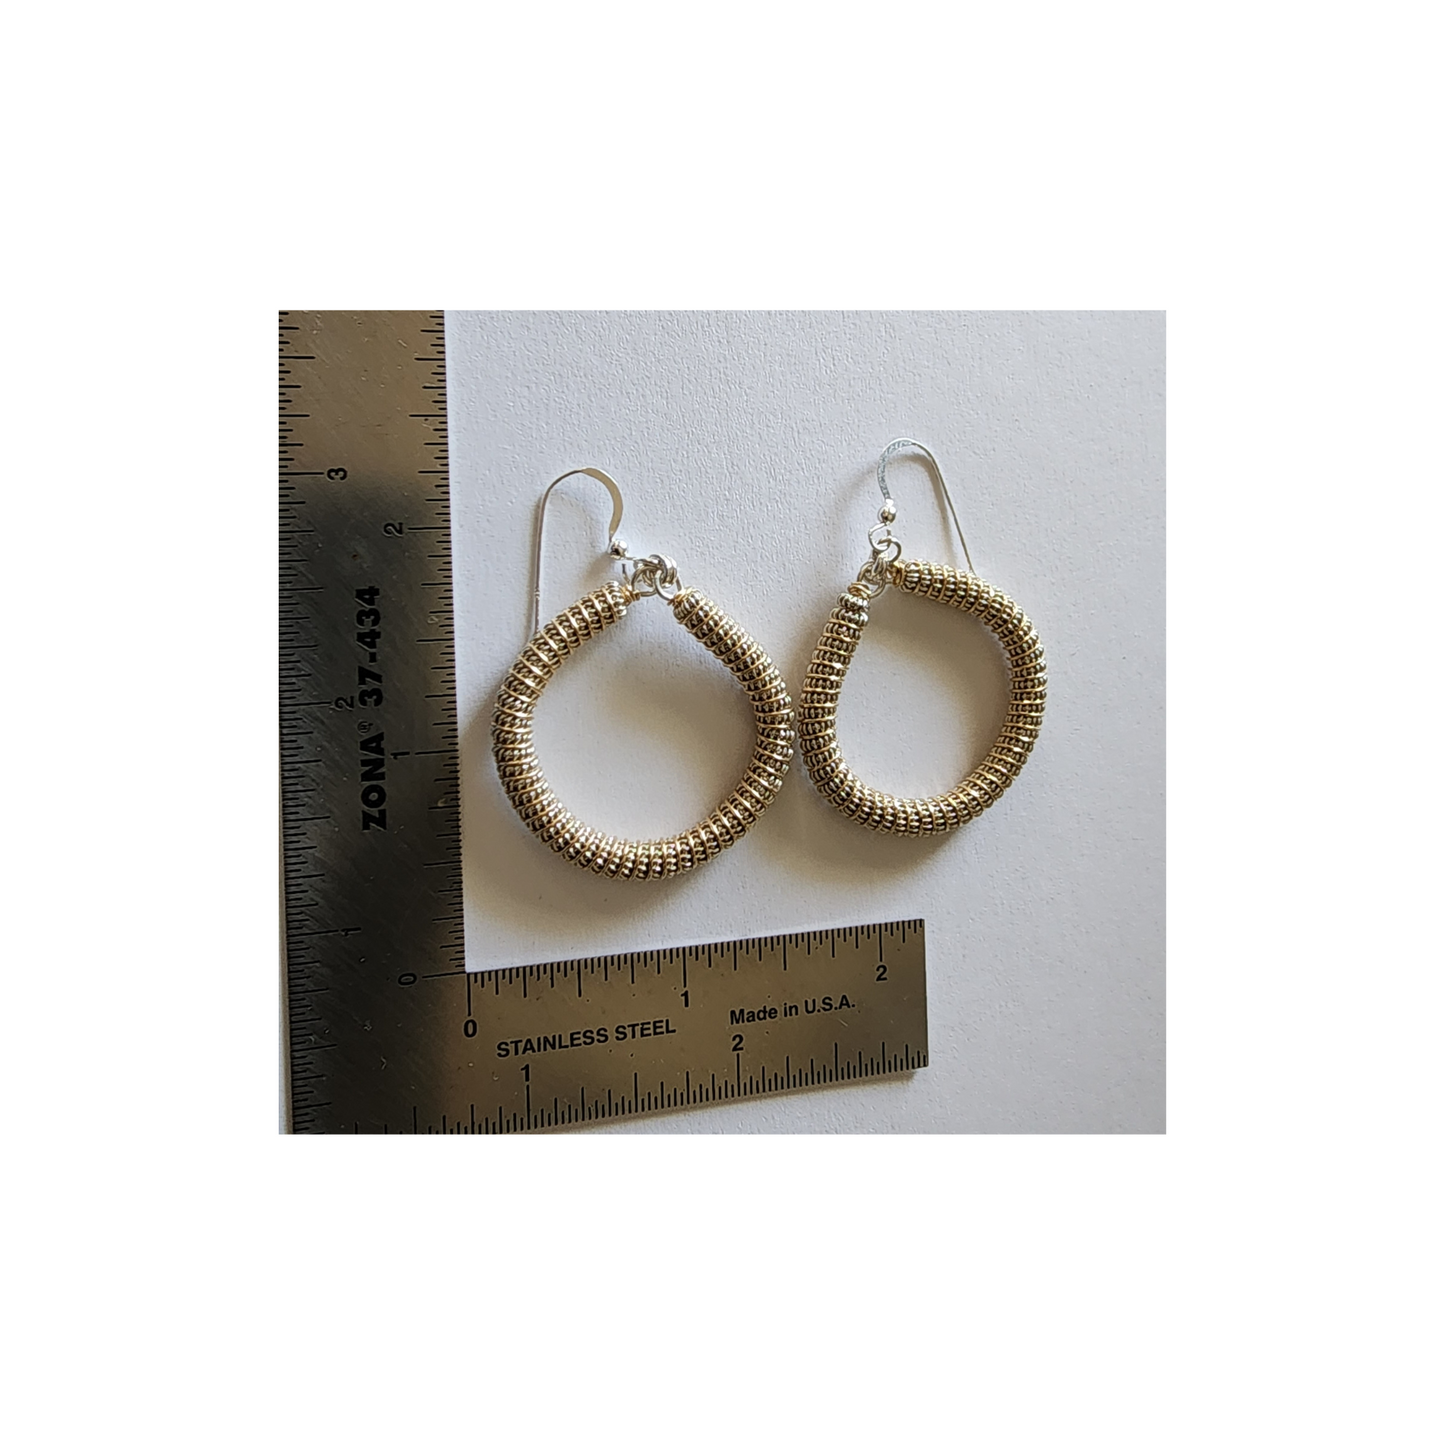 Handmade Womans Silver and Gold Double Coil Hoop Earrings